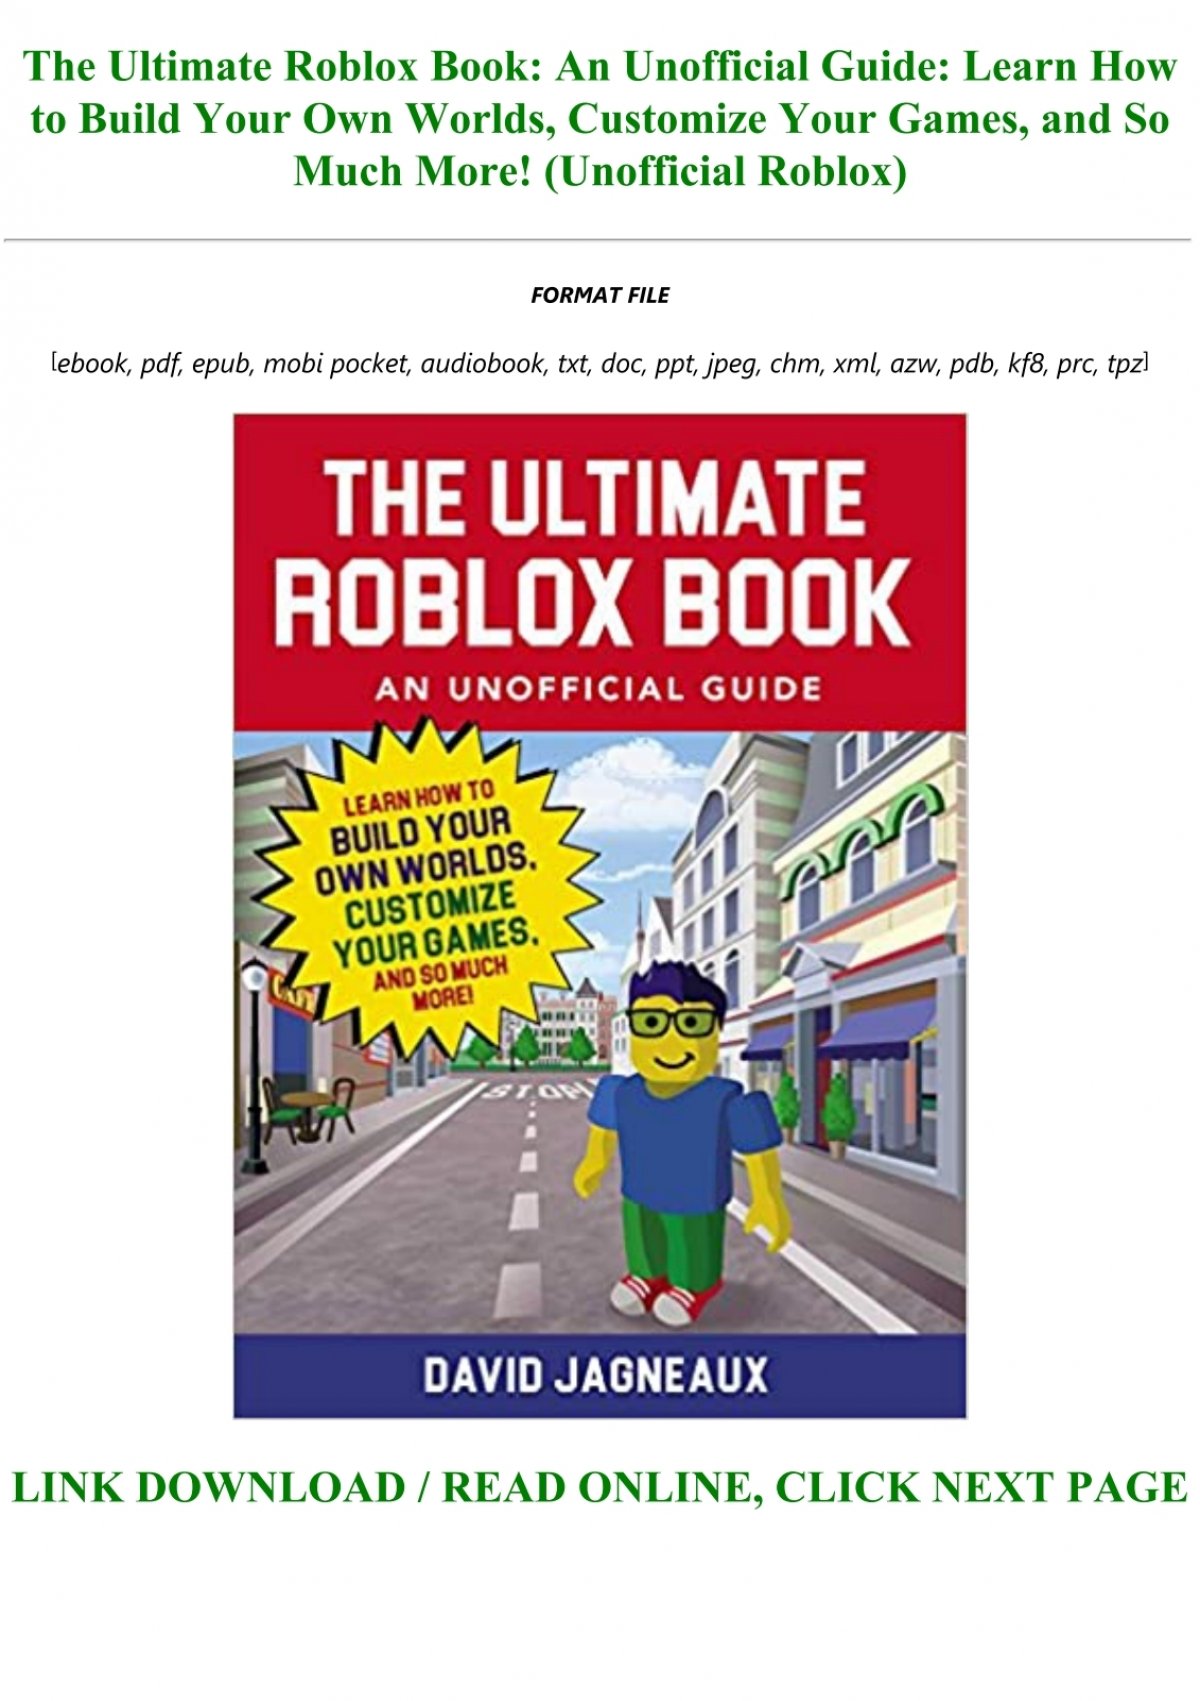 Read Book The Ultimate Roblox Book An Unofficial Guide Learn How To Build Your Own Worlds Customize Your Games And So Much More Unofficial Roblox Full Acces - roblox hacks meme roblox free build